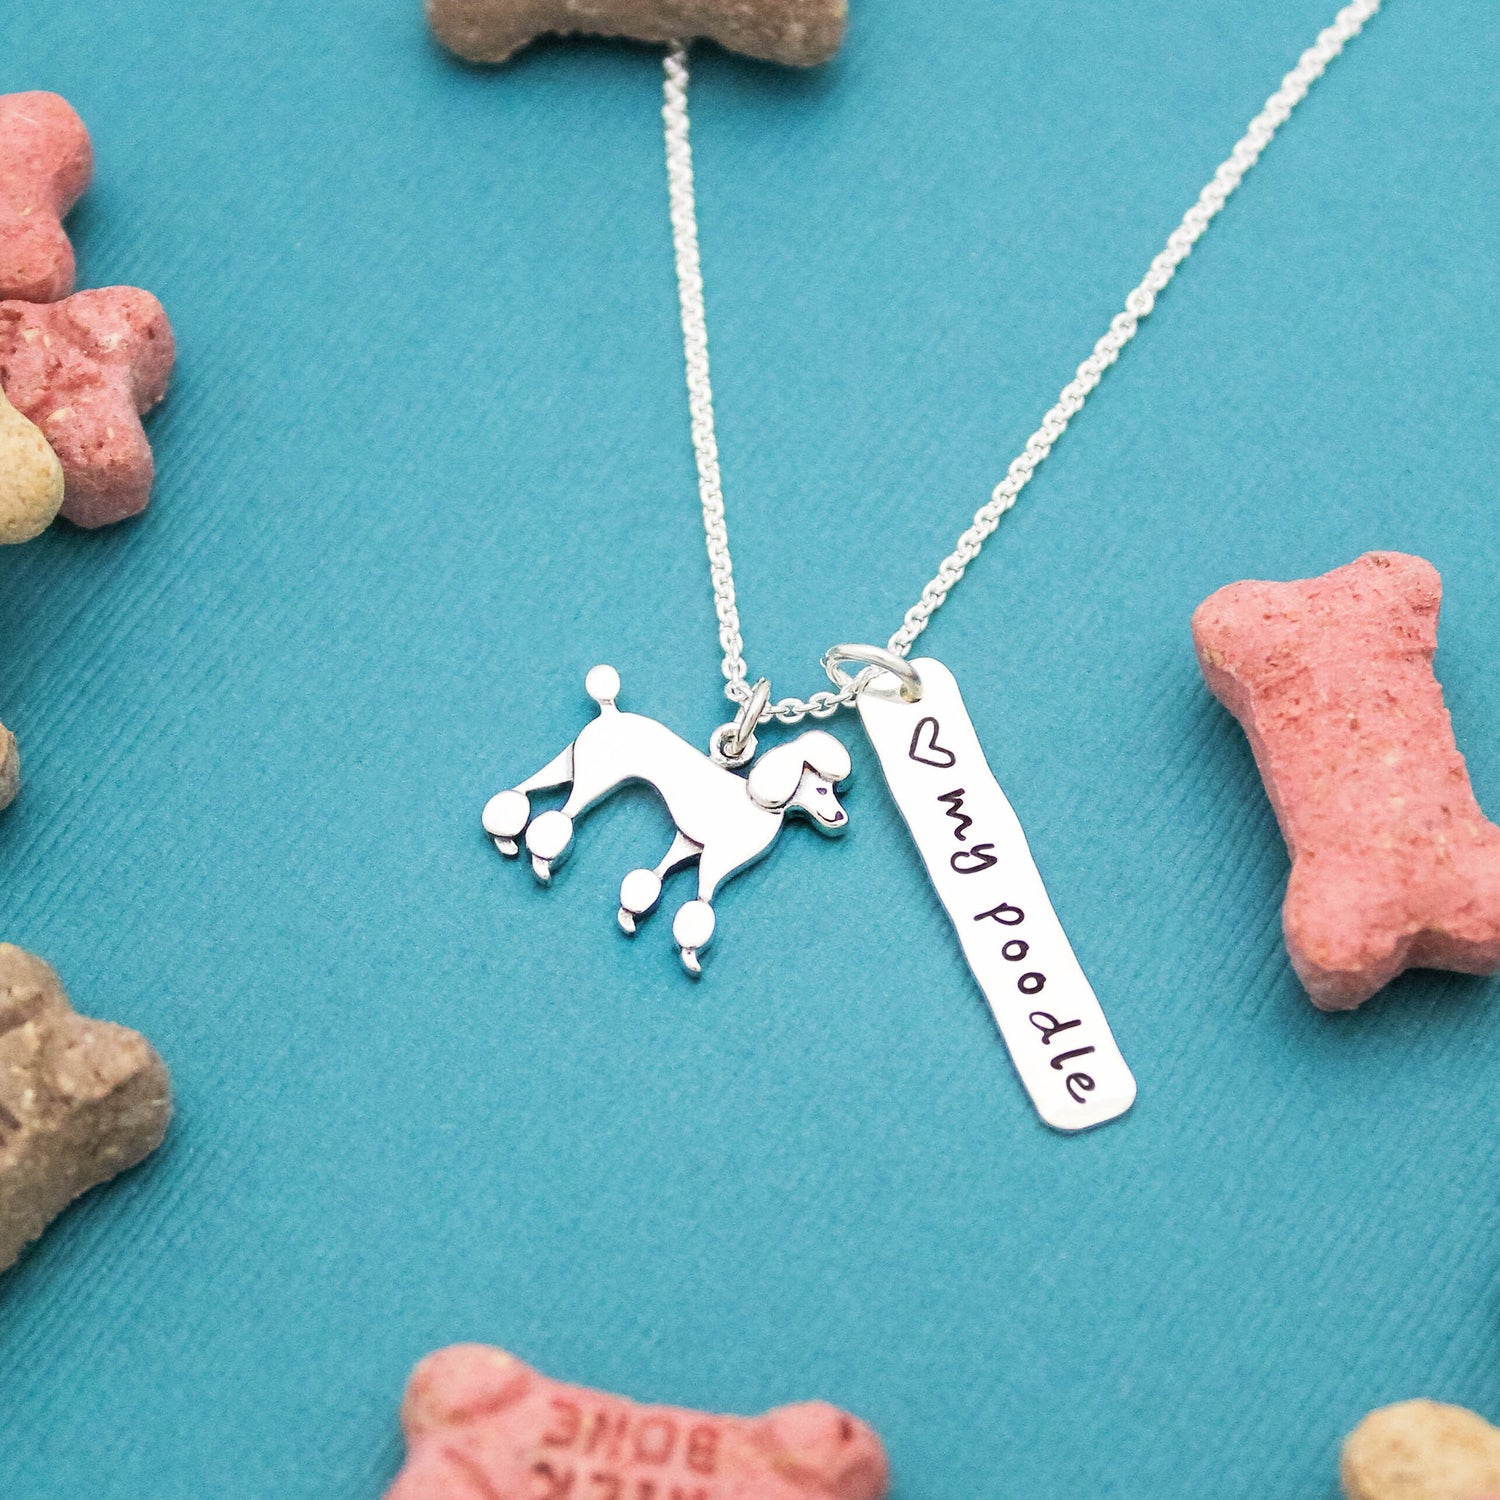 LOVE my POODLE Necklace, Sterling Silver Dog Necklace, Poodle Lover Gift, New Pet Gift, Dog Poodle Jewelry, Poodle Necklace, Hand Stamped